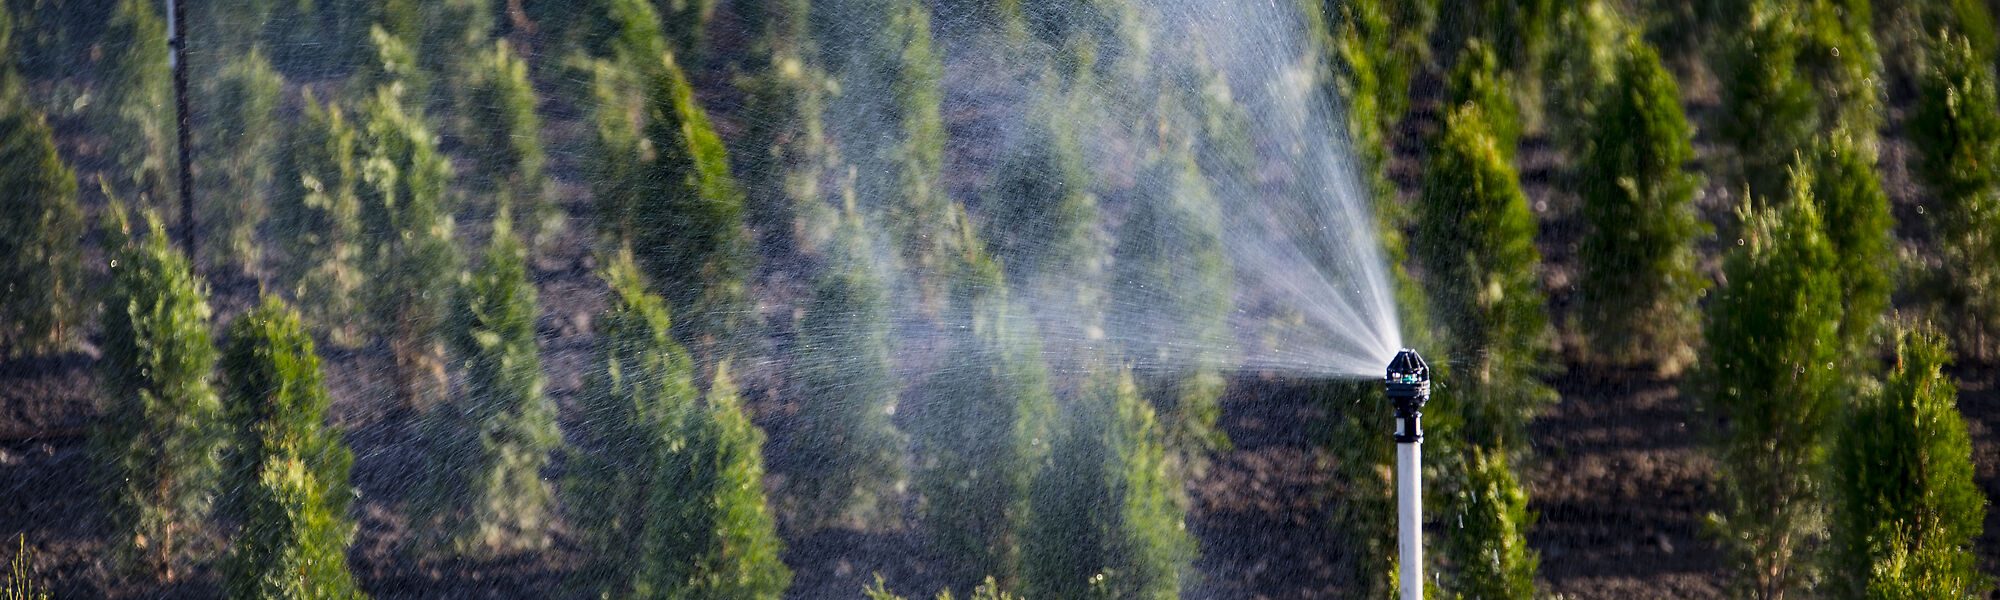 Nelson's R2000WF Rotator sprinklers are a great choice for irrigating field grown nursery stock such as arborvitae. 